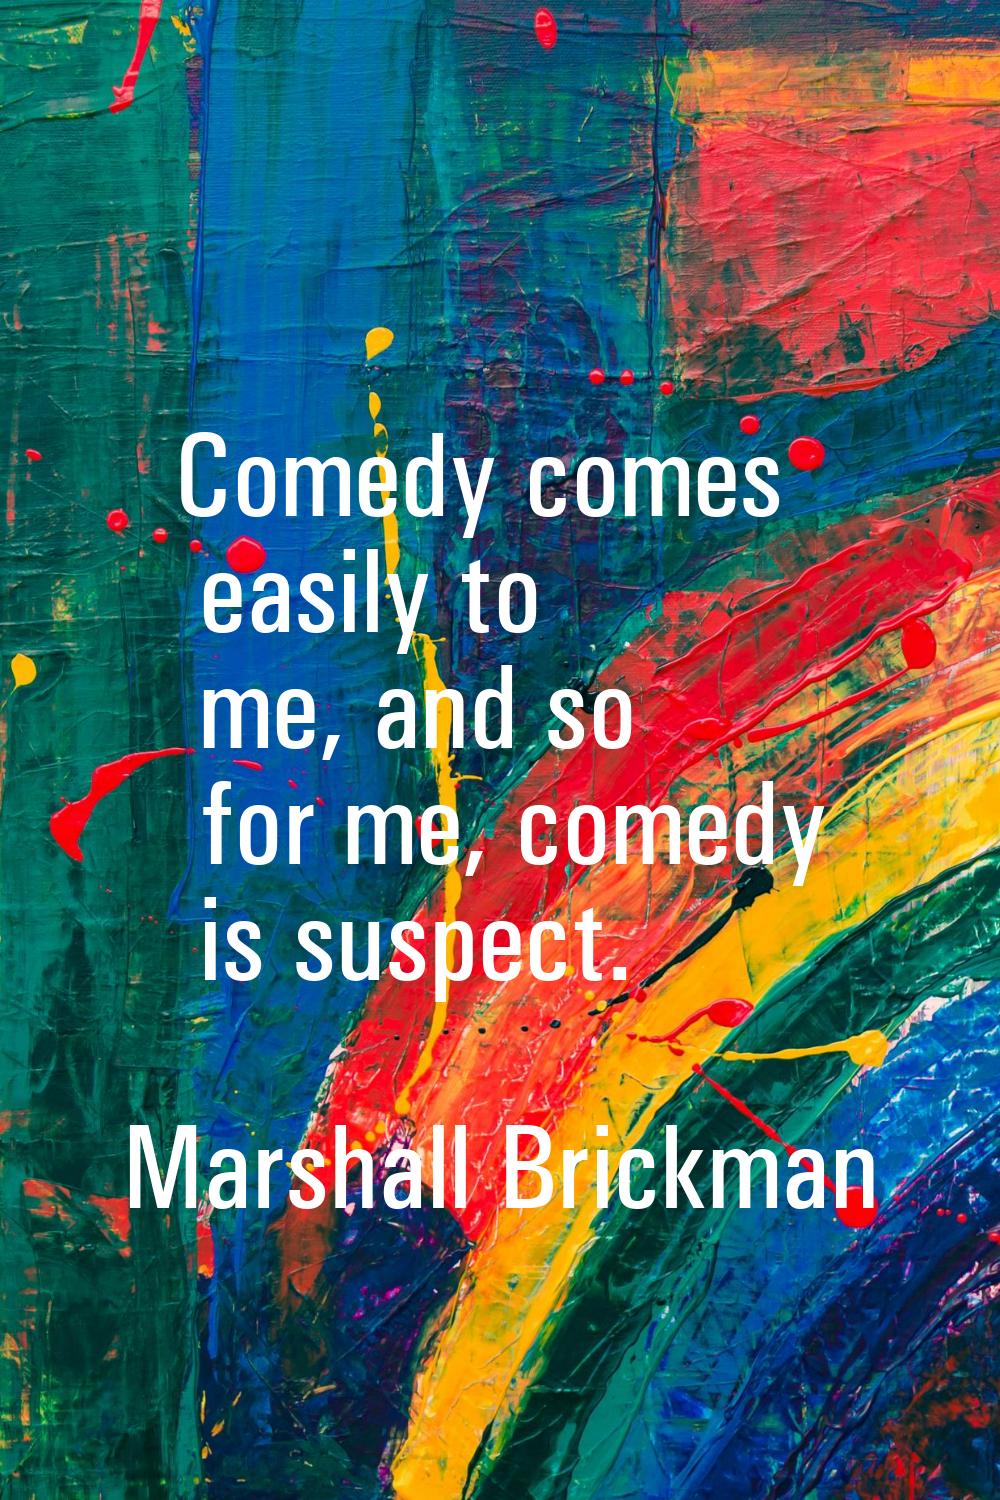 Comedy comes easily to me, and so for me, comedy is suspect.